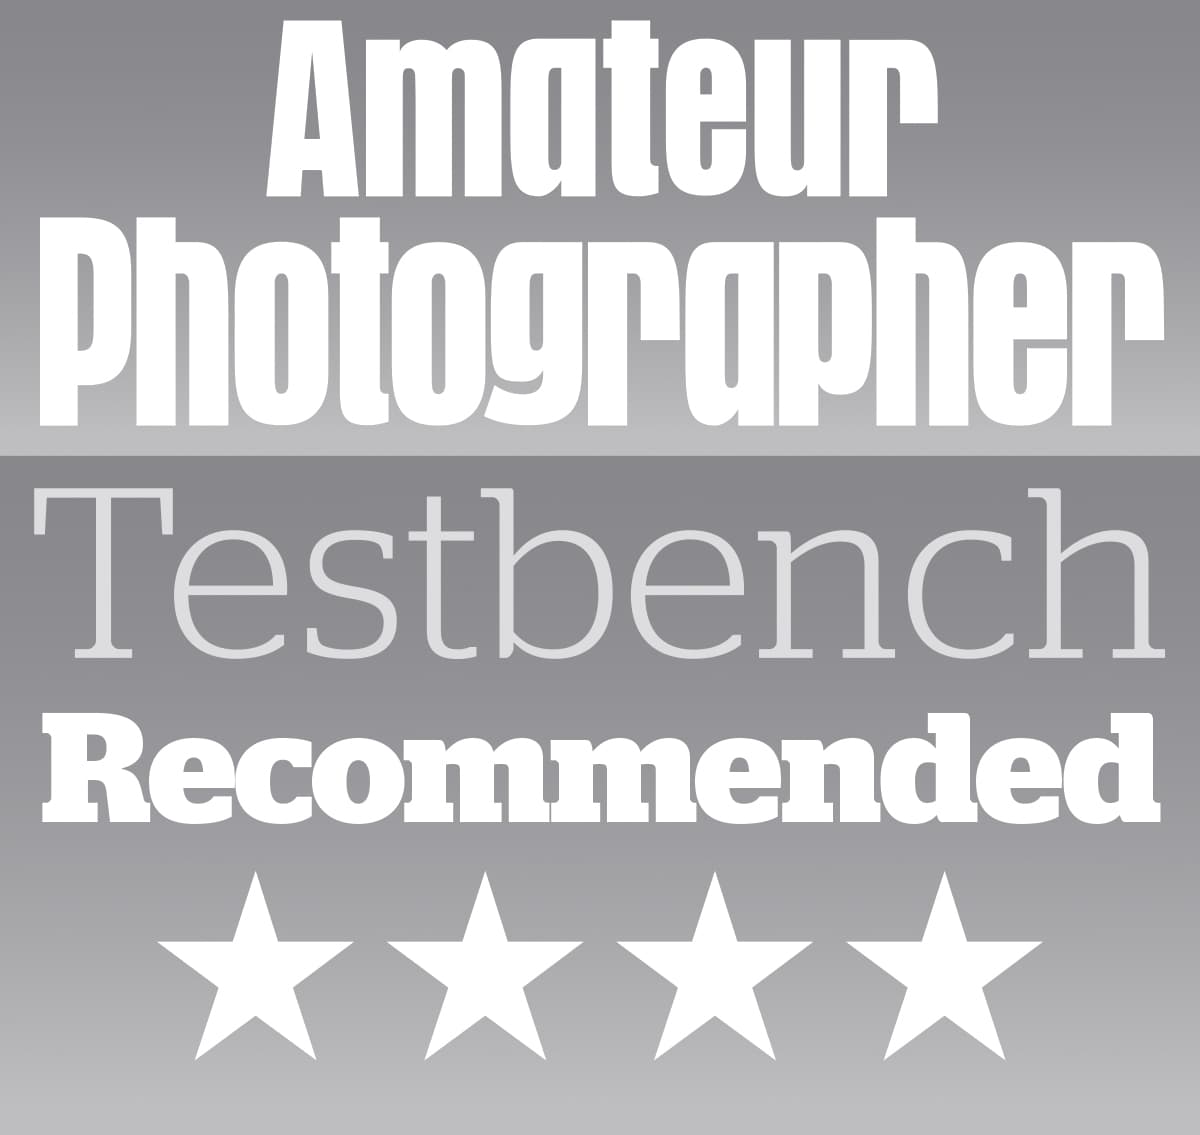 Testbench Recommended 4-stars